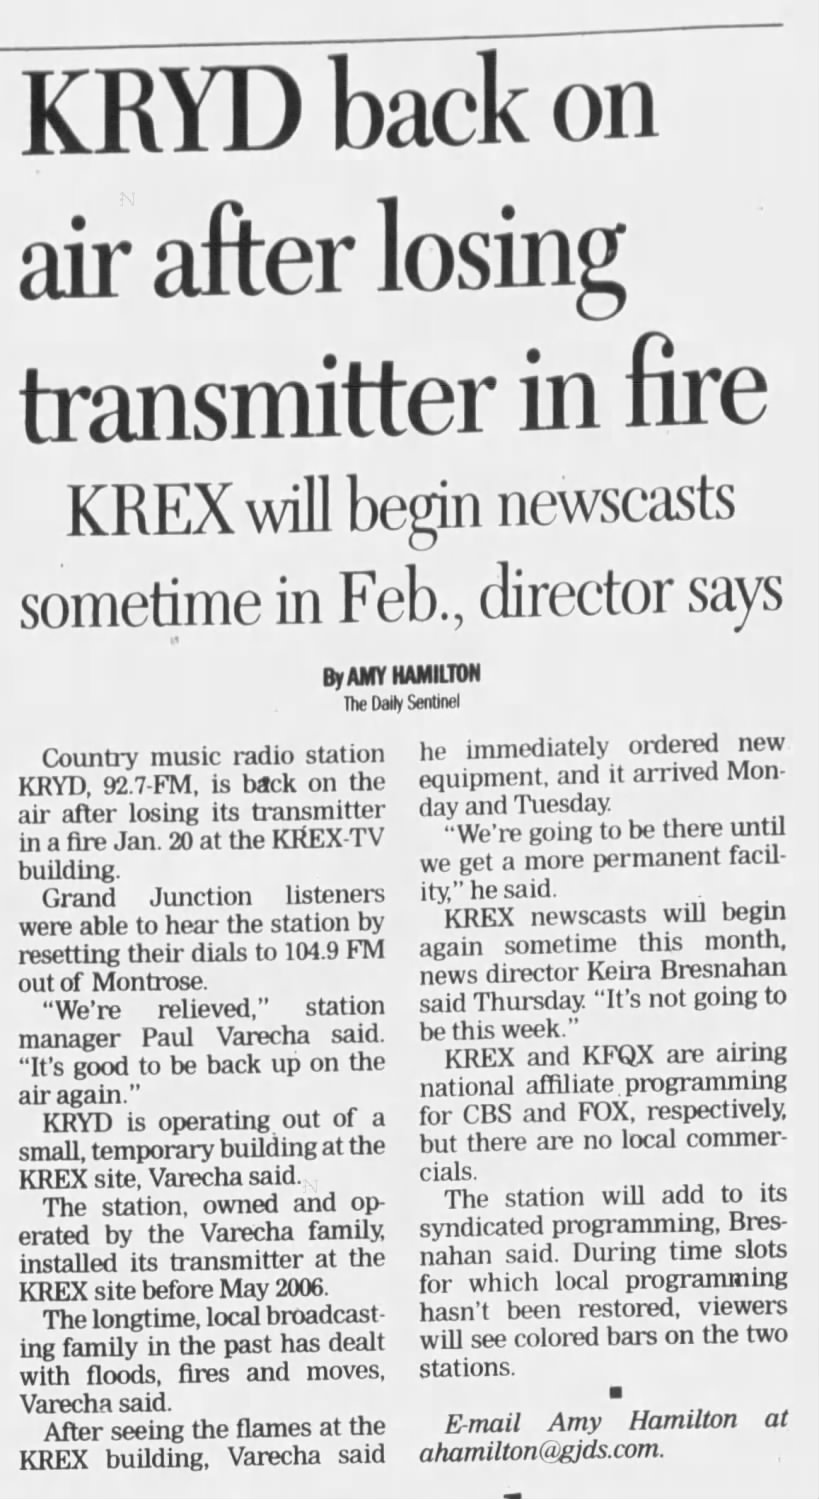 KRYD back on air after losing transmitter in fire: KREX will begin newscasts sometime in Feb., 